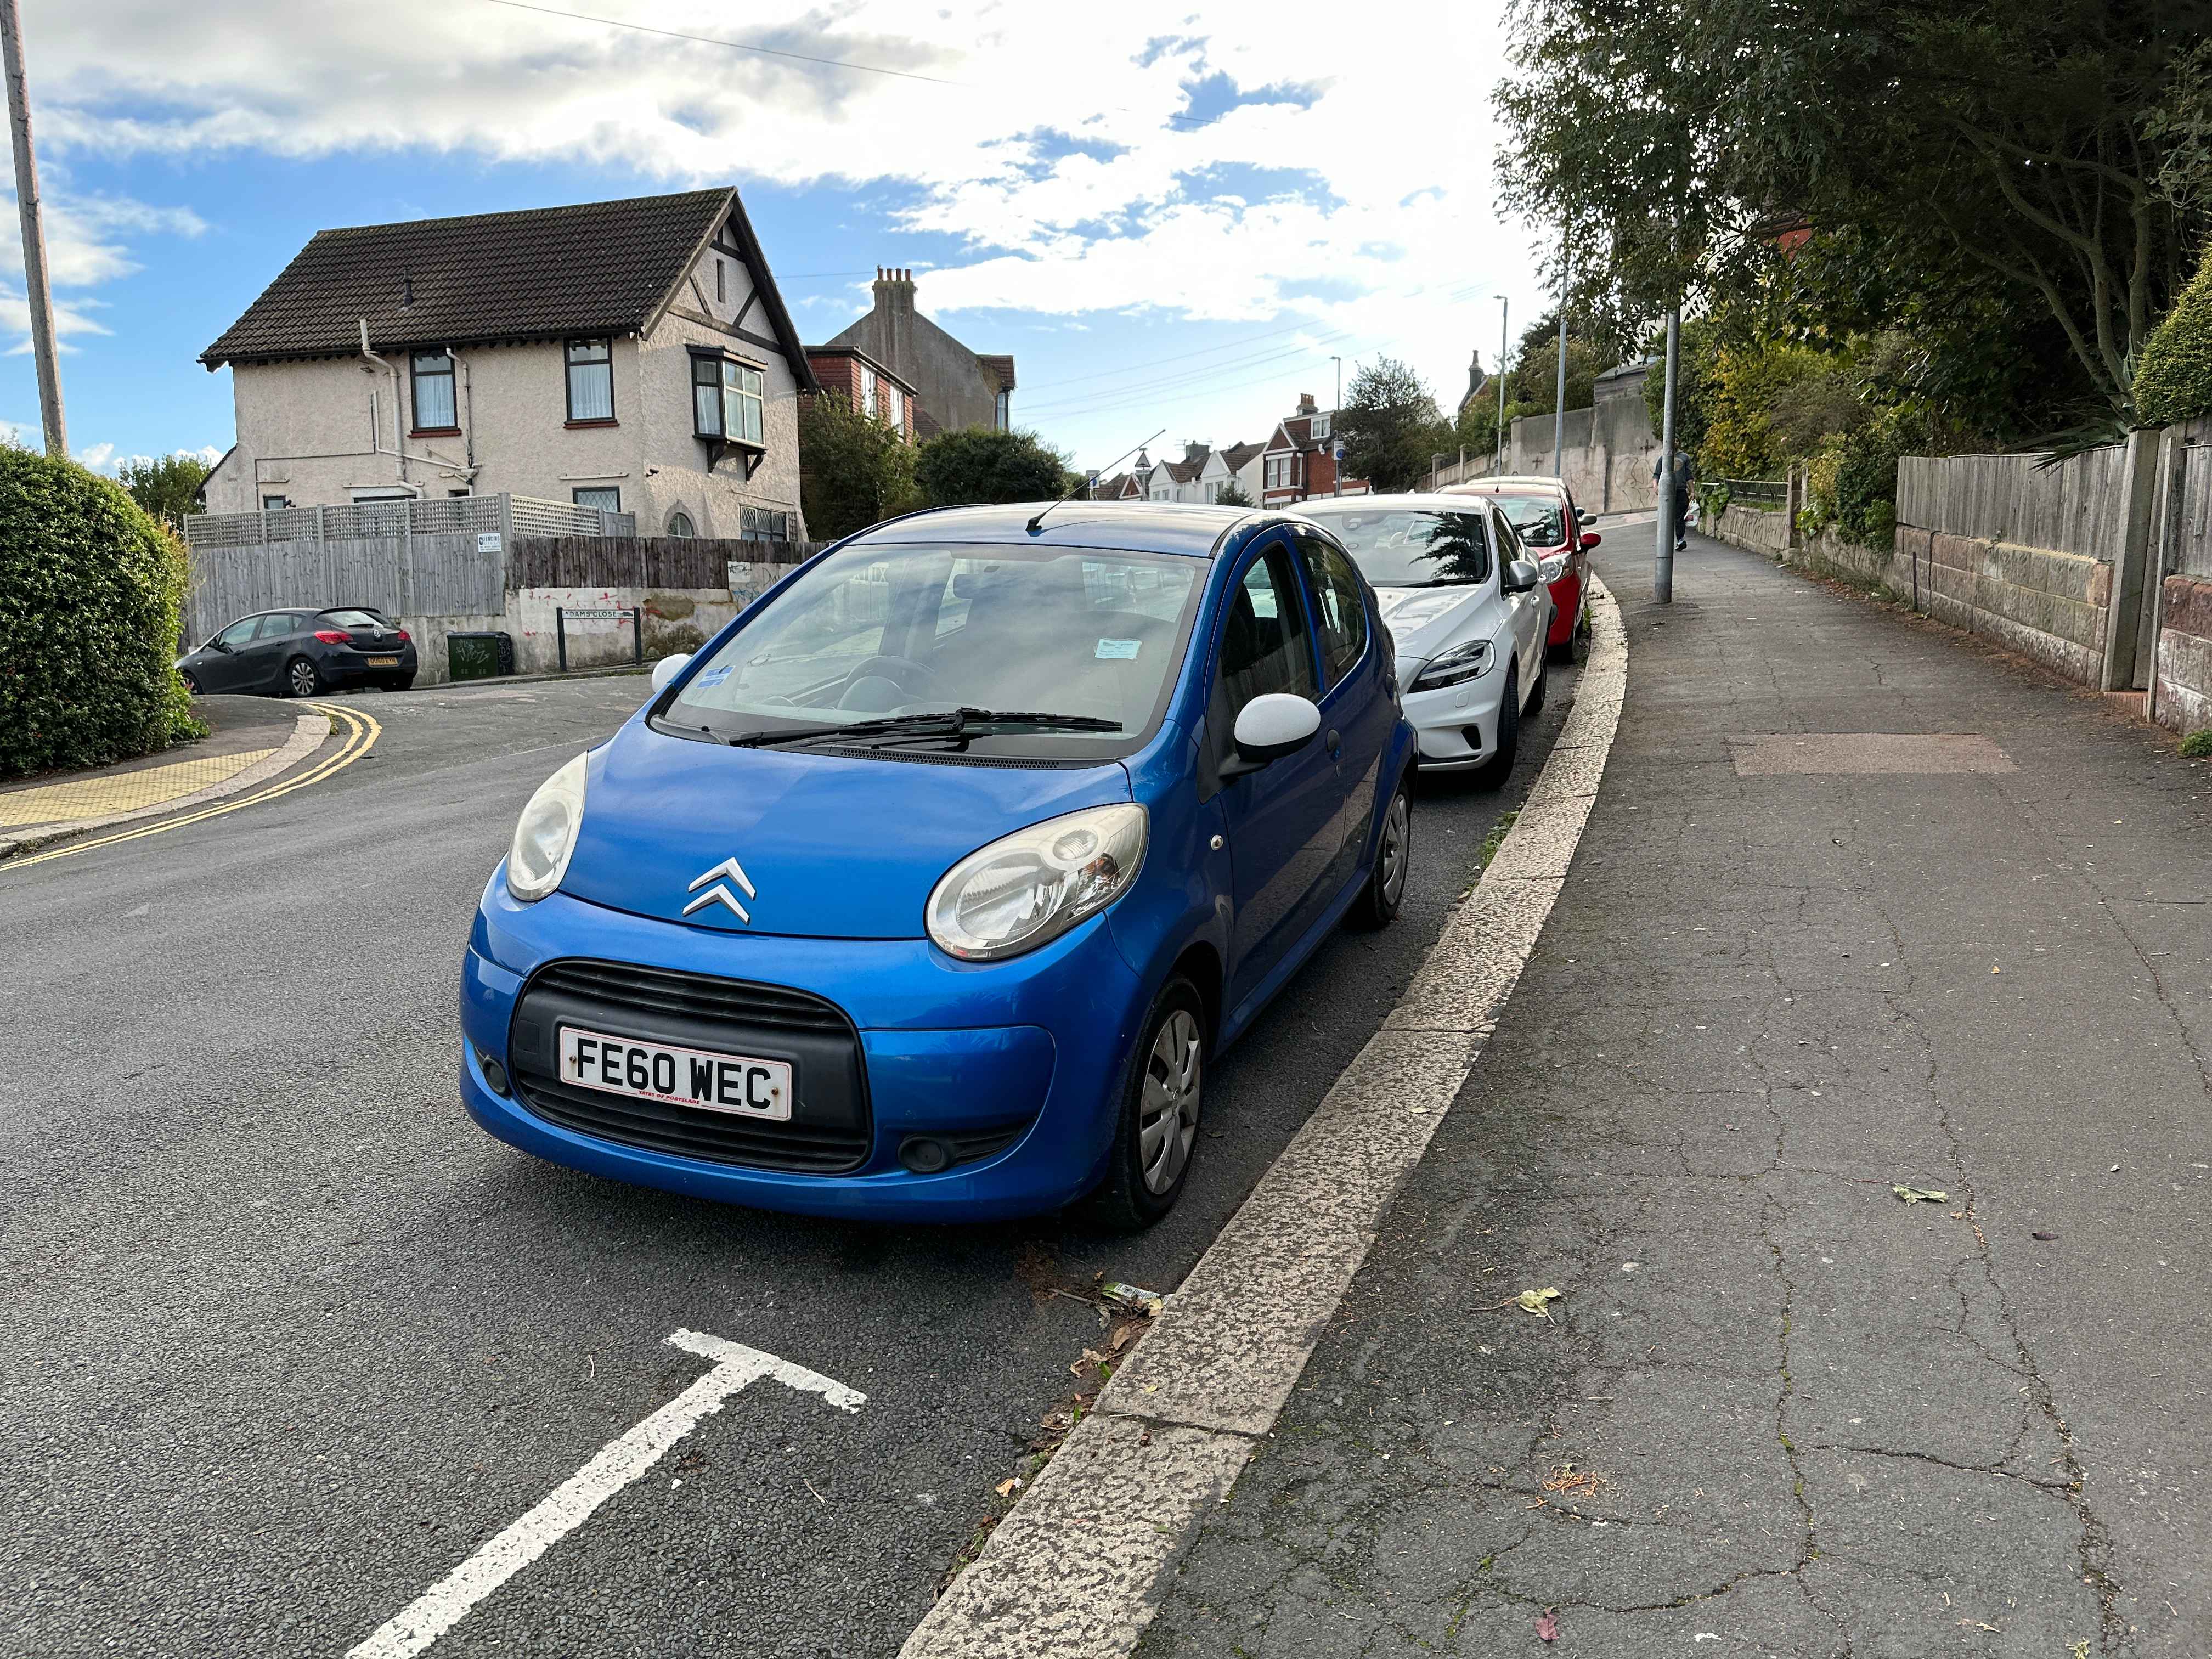 Photograph of FE60 WEC - a Blue Citroen C1 parked in Hollingdean by a non-resident. The third of ten photographs supplied by the residents of Hollingdean.